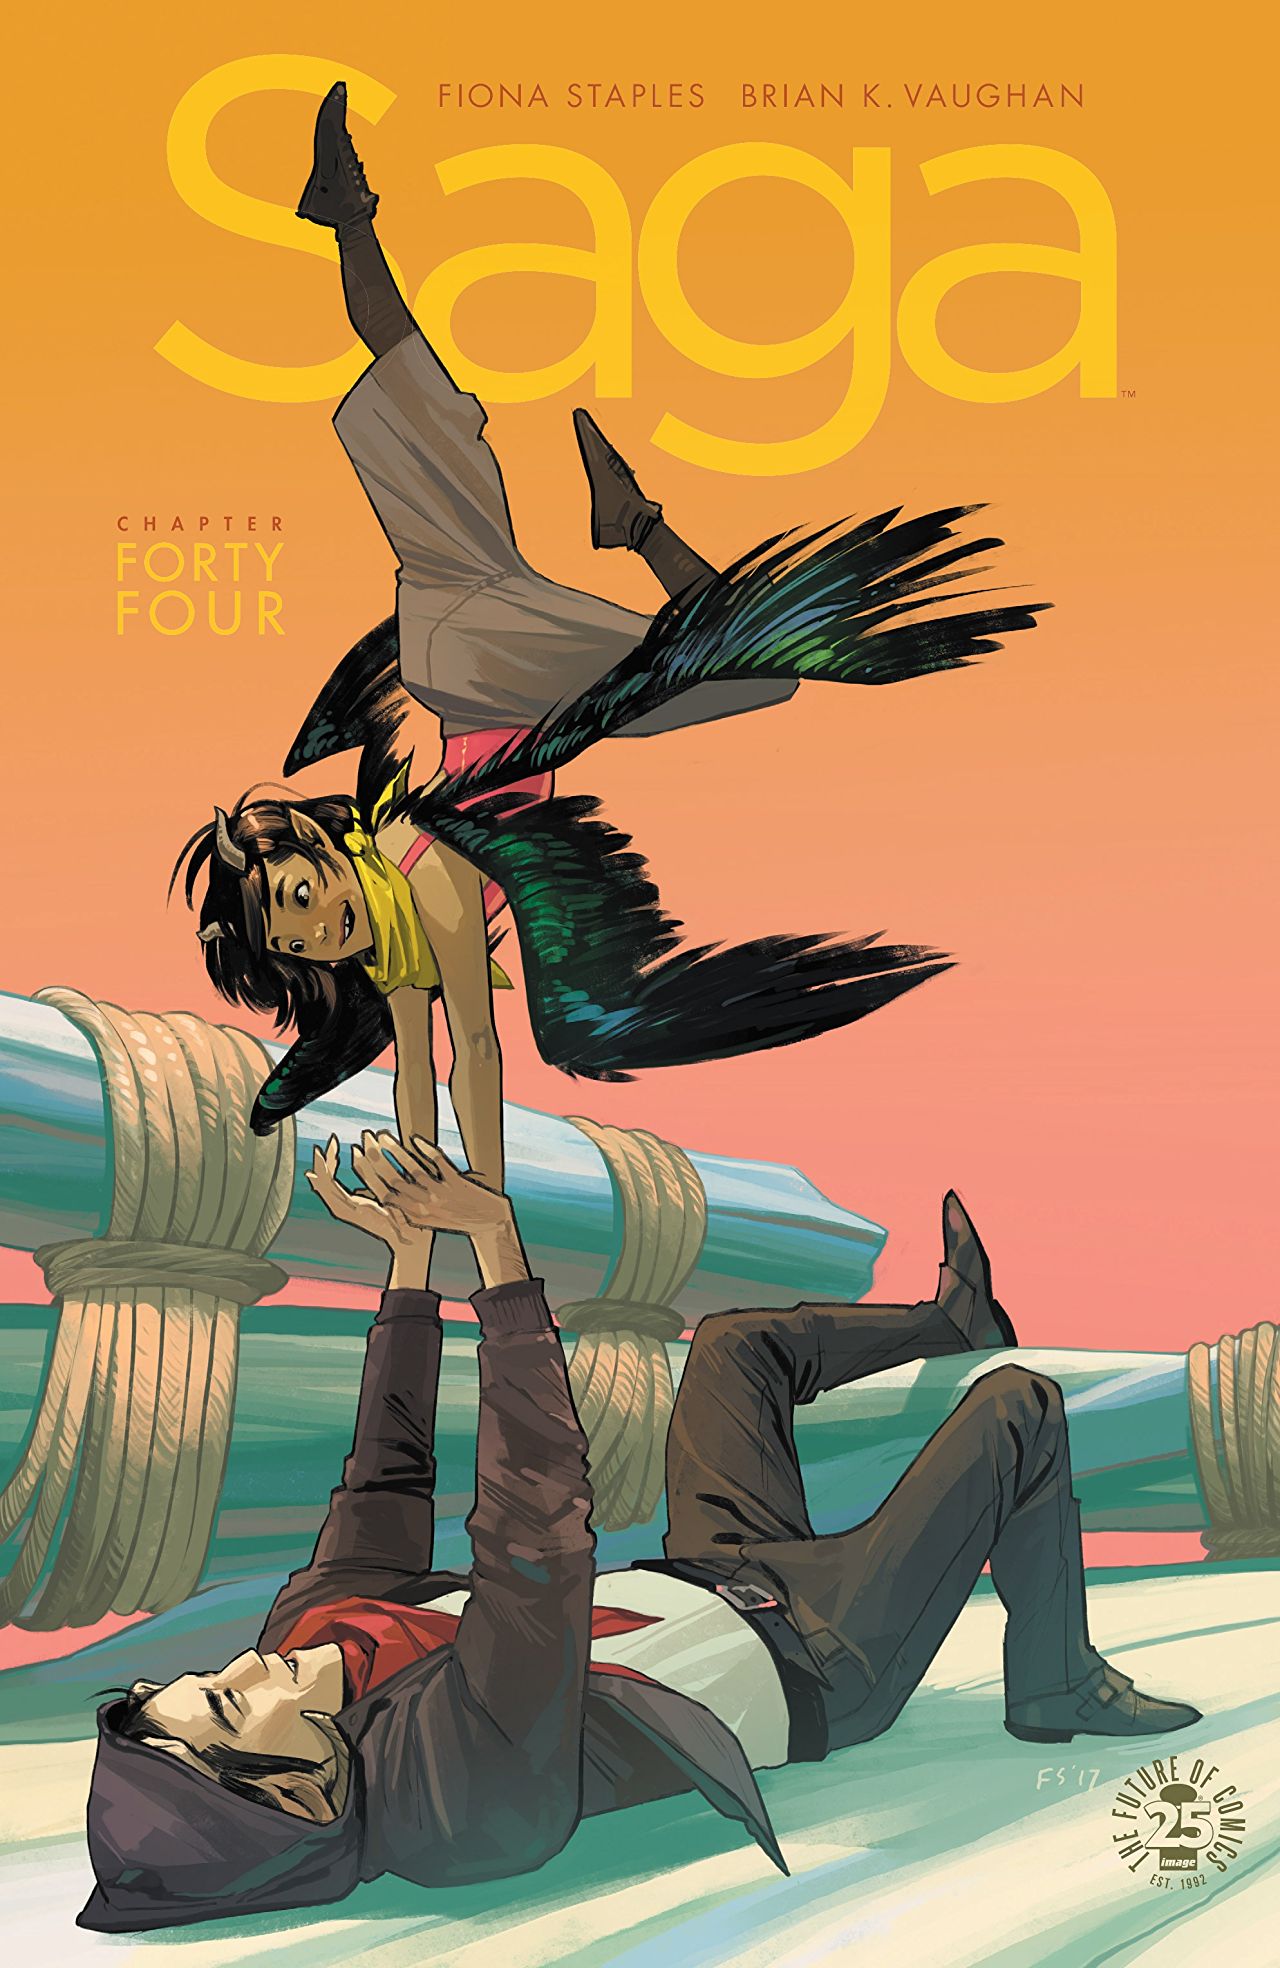 A bird winged young girl poses acrobatically in the arms of an older man who is pushing her up from the ground. This is the cover for Saga. 